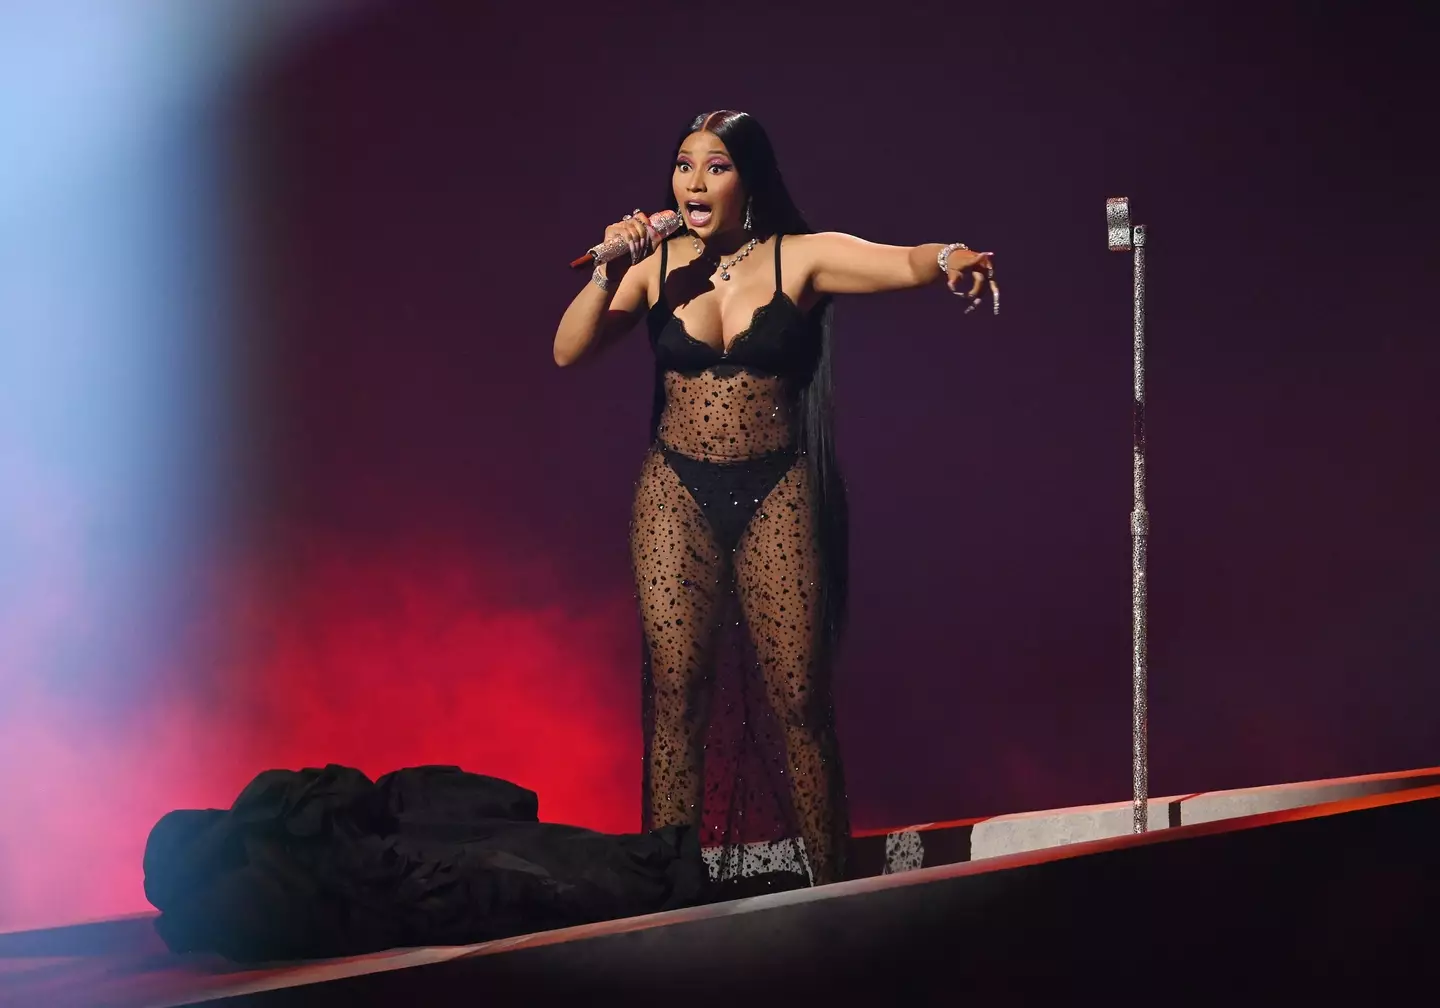 Minaj also explained that after giving birth to her son, she felt pressure to quickly get back into shape.